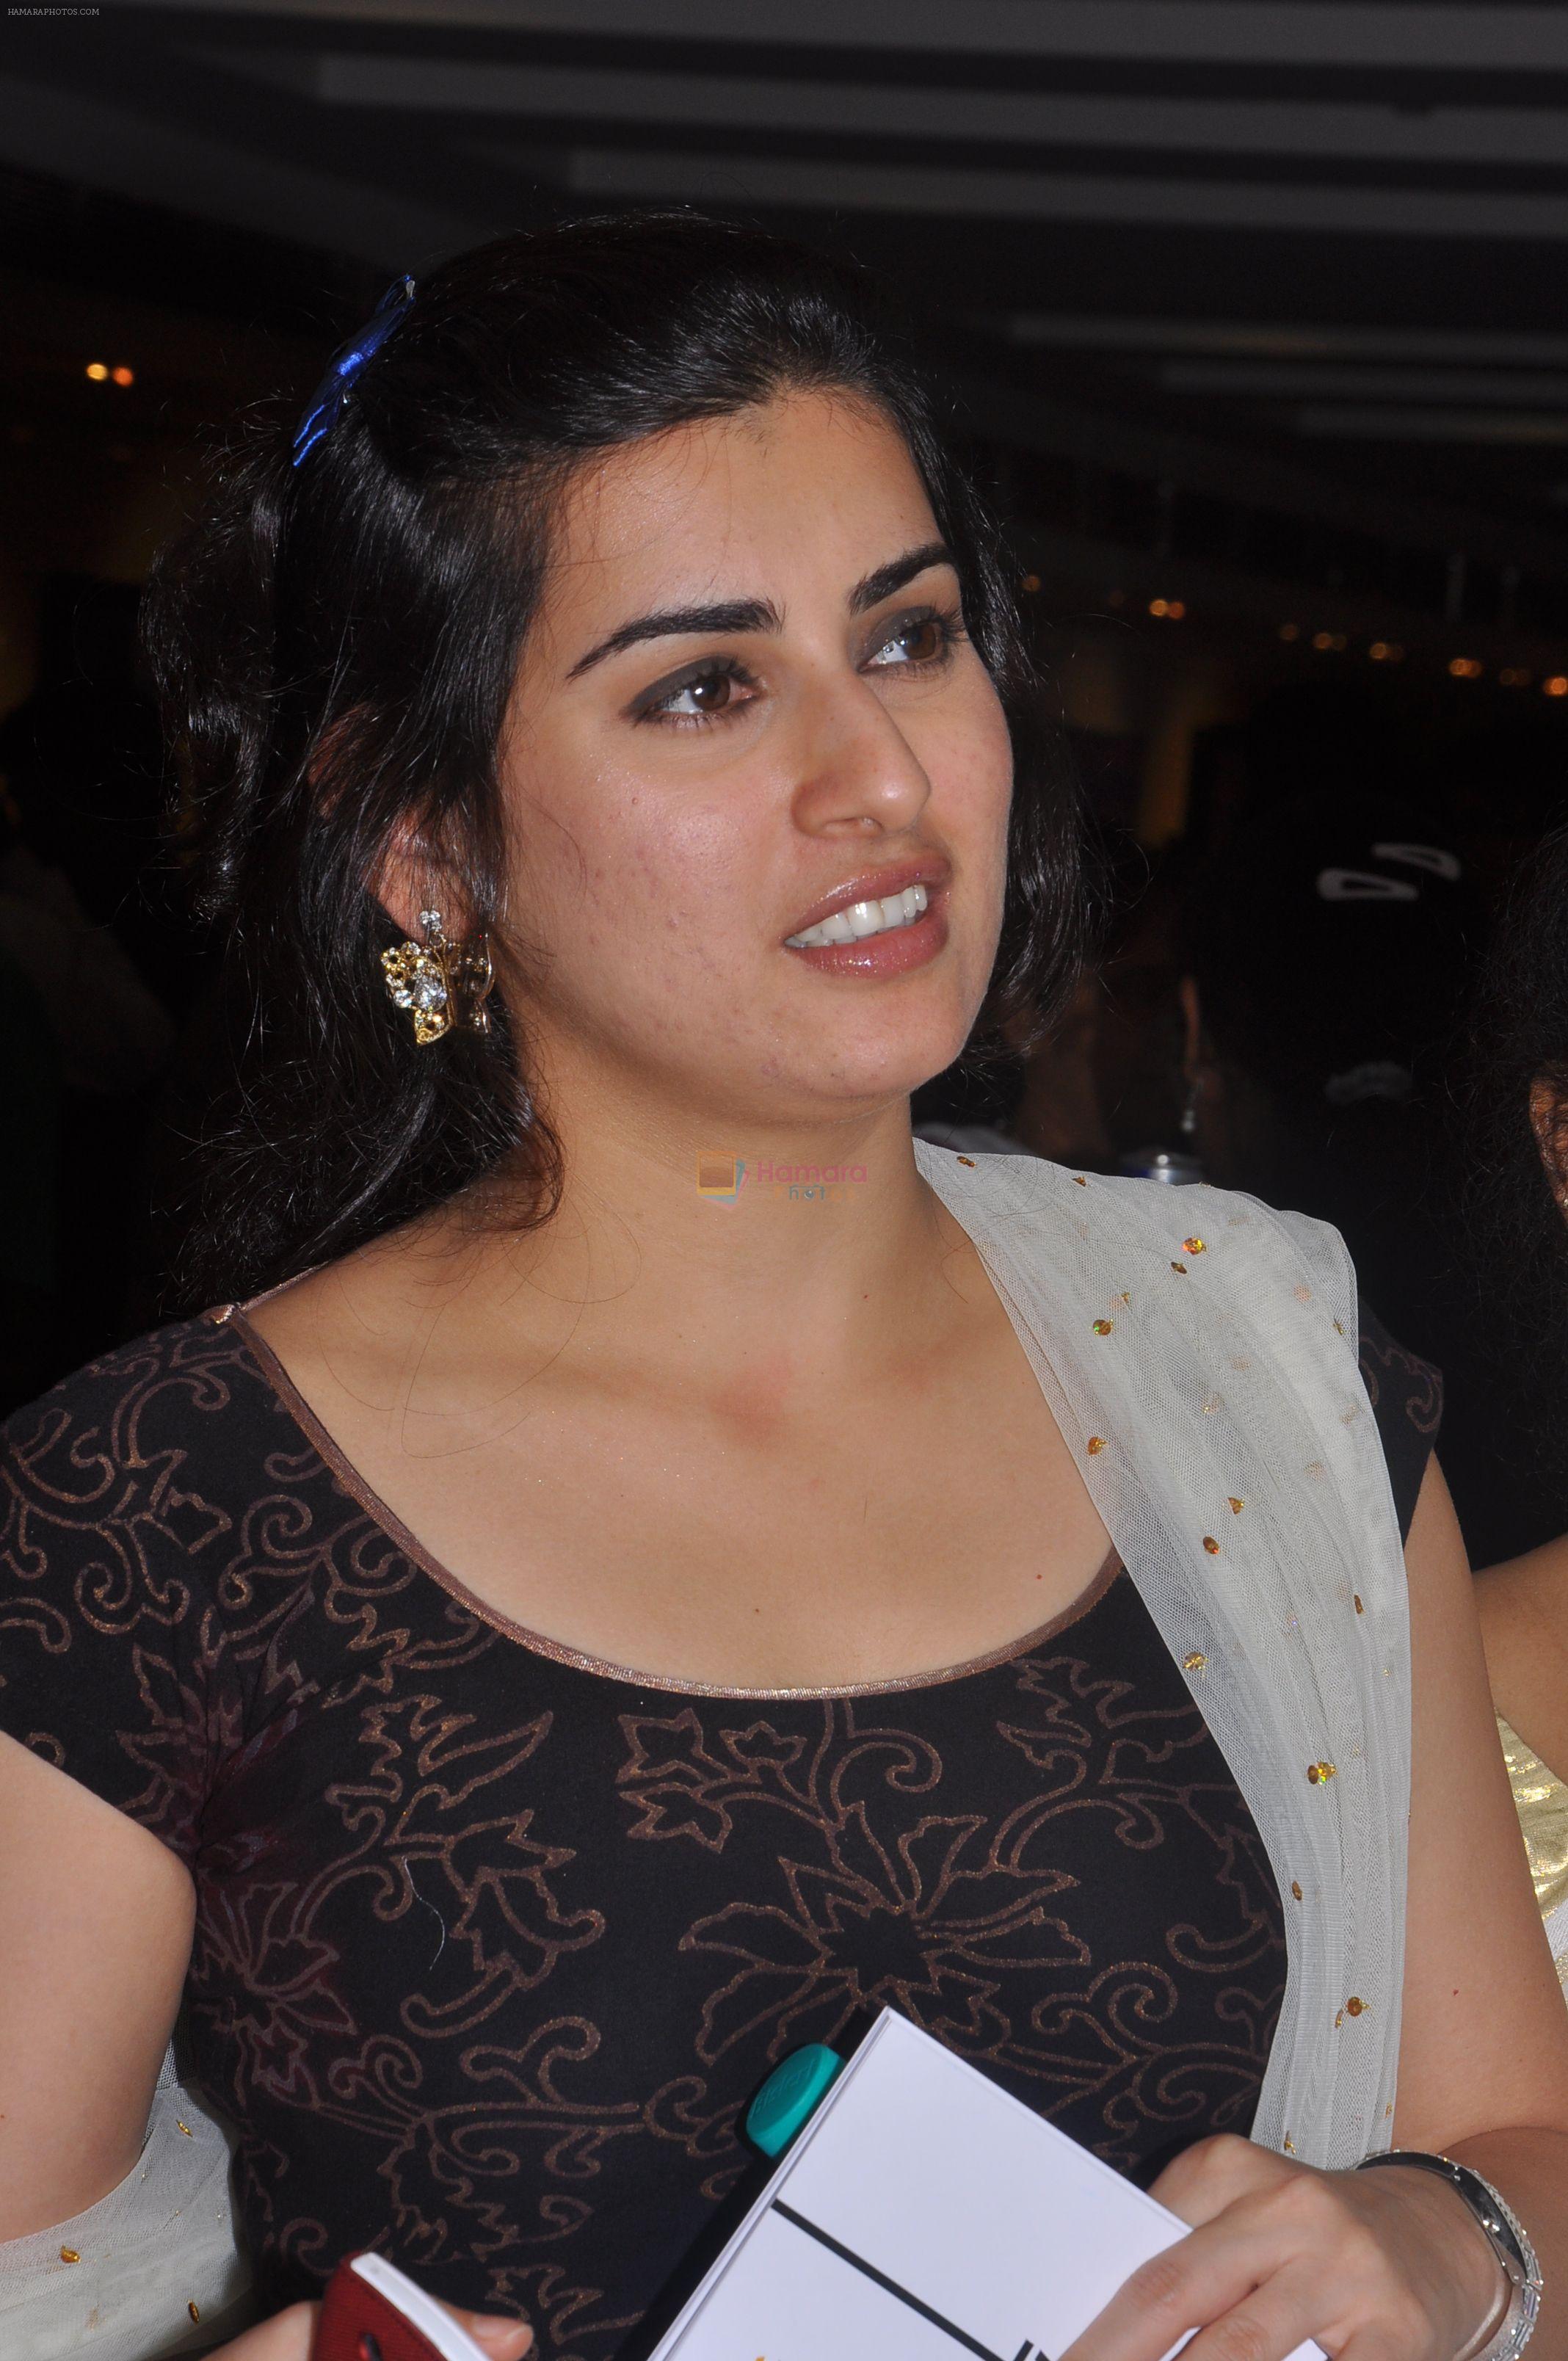 Archana attends Muse the Art Gallery Group Show Multiversal at Marriot Hotel on 16th September 2011